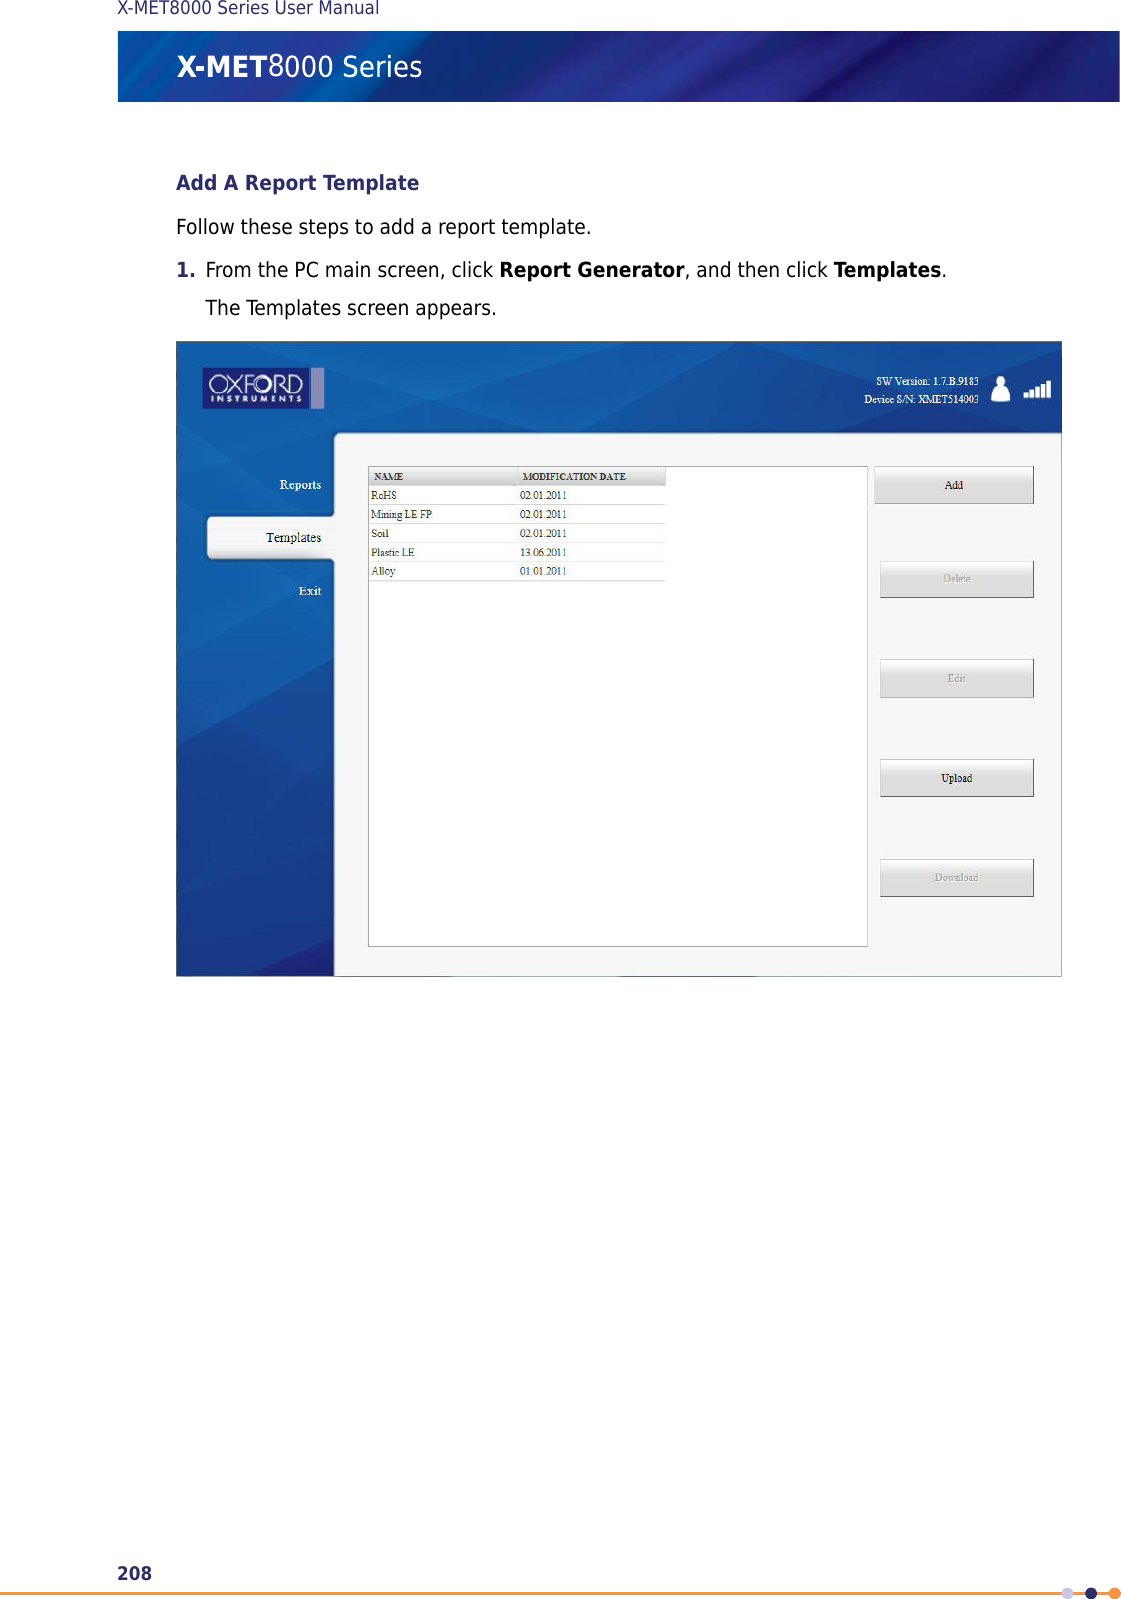 Add A Report TemplateFollow these steps to add a report template.1. From the PC main screen, click Report Generator, and then click Templates.The Templates screen appears.208X-MET8000 Series User Manual8